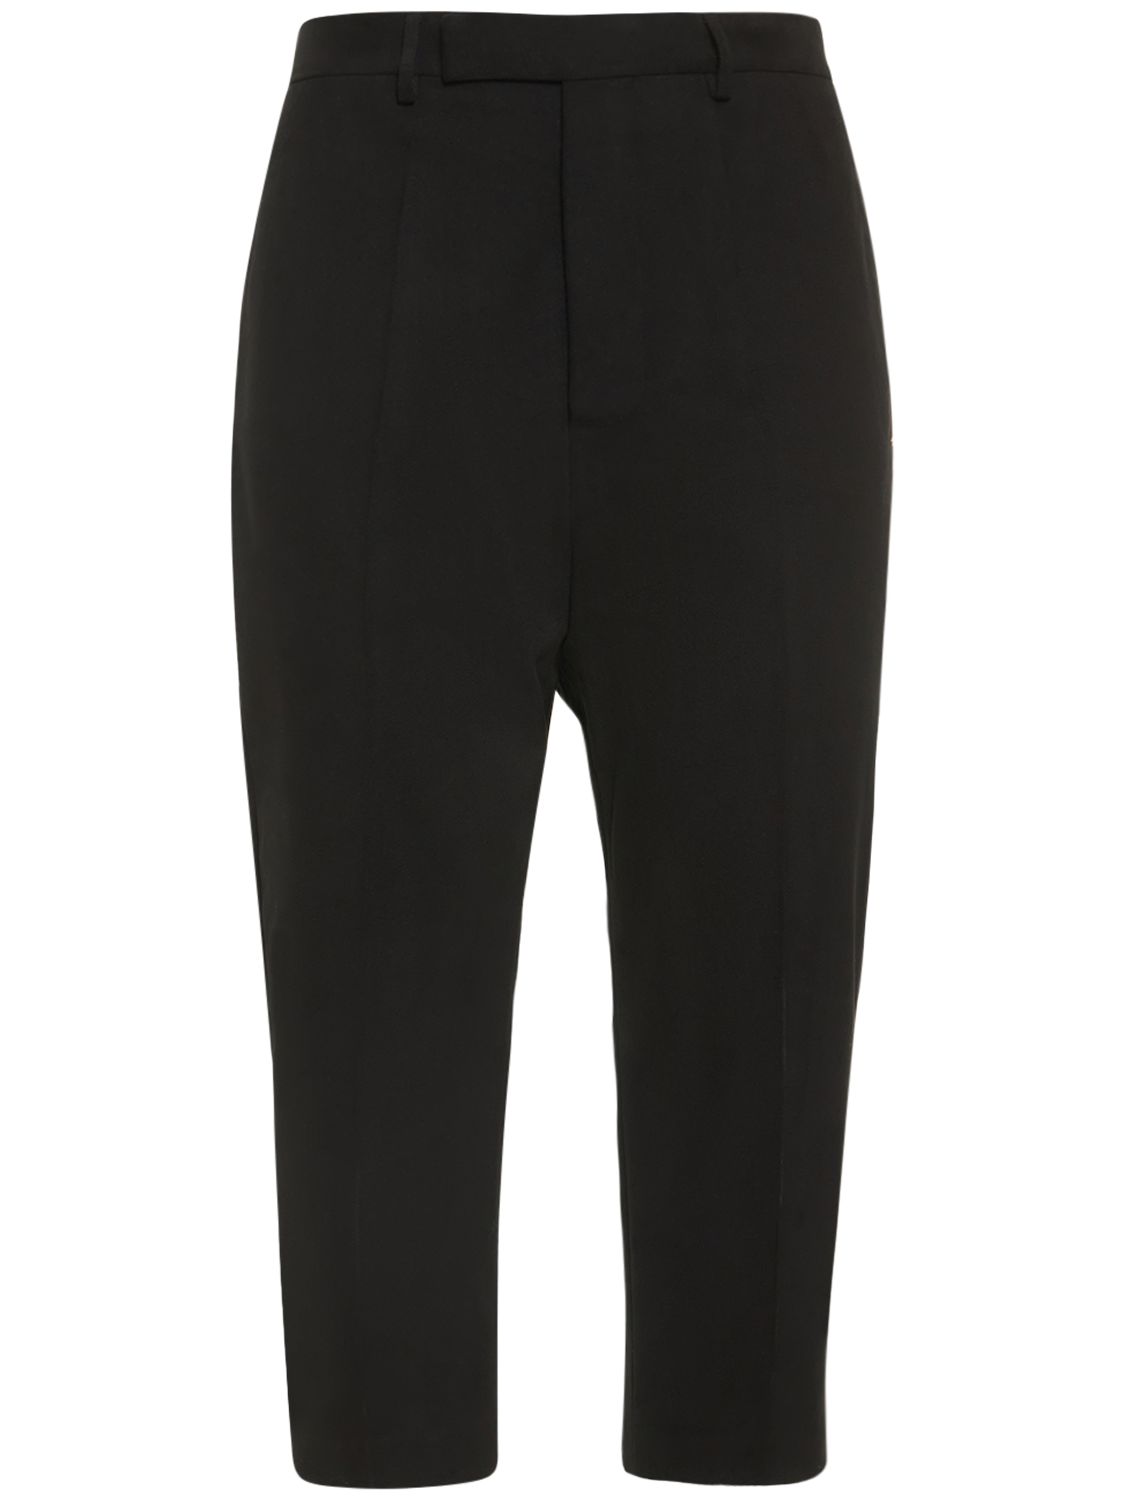 Astaires Stretch Wool Cropped Pants